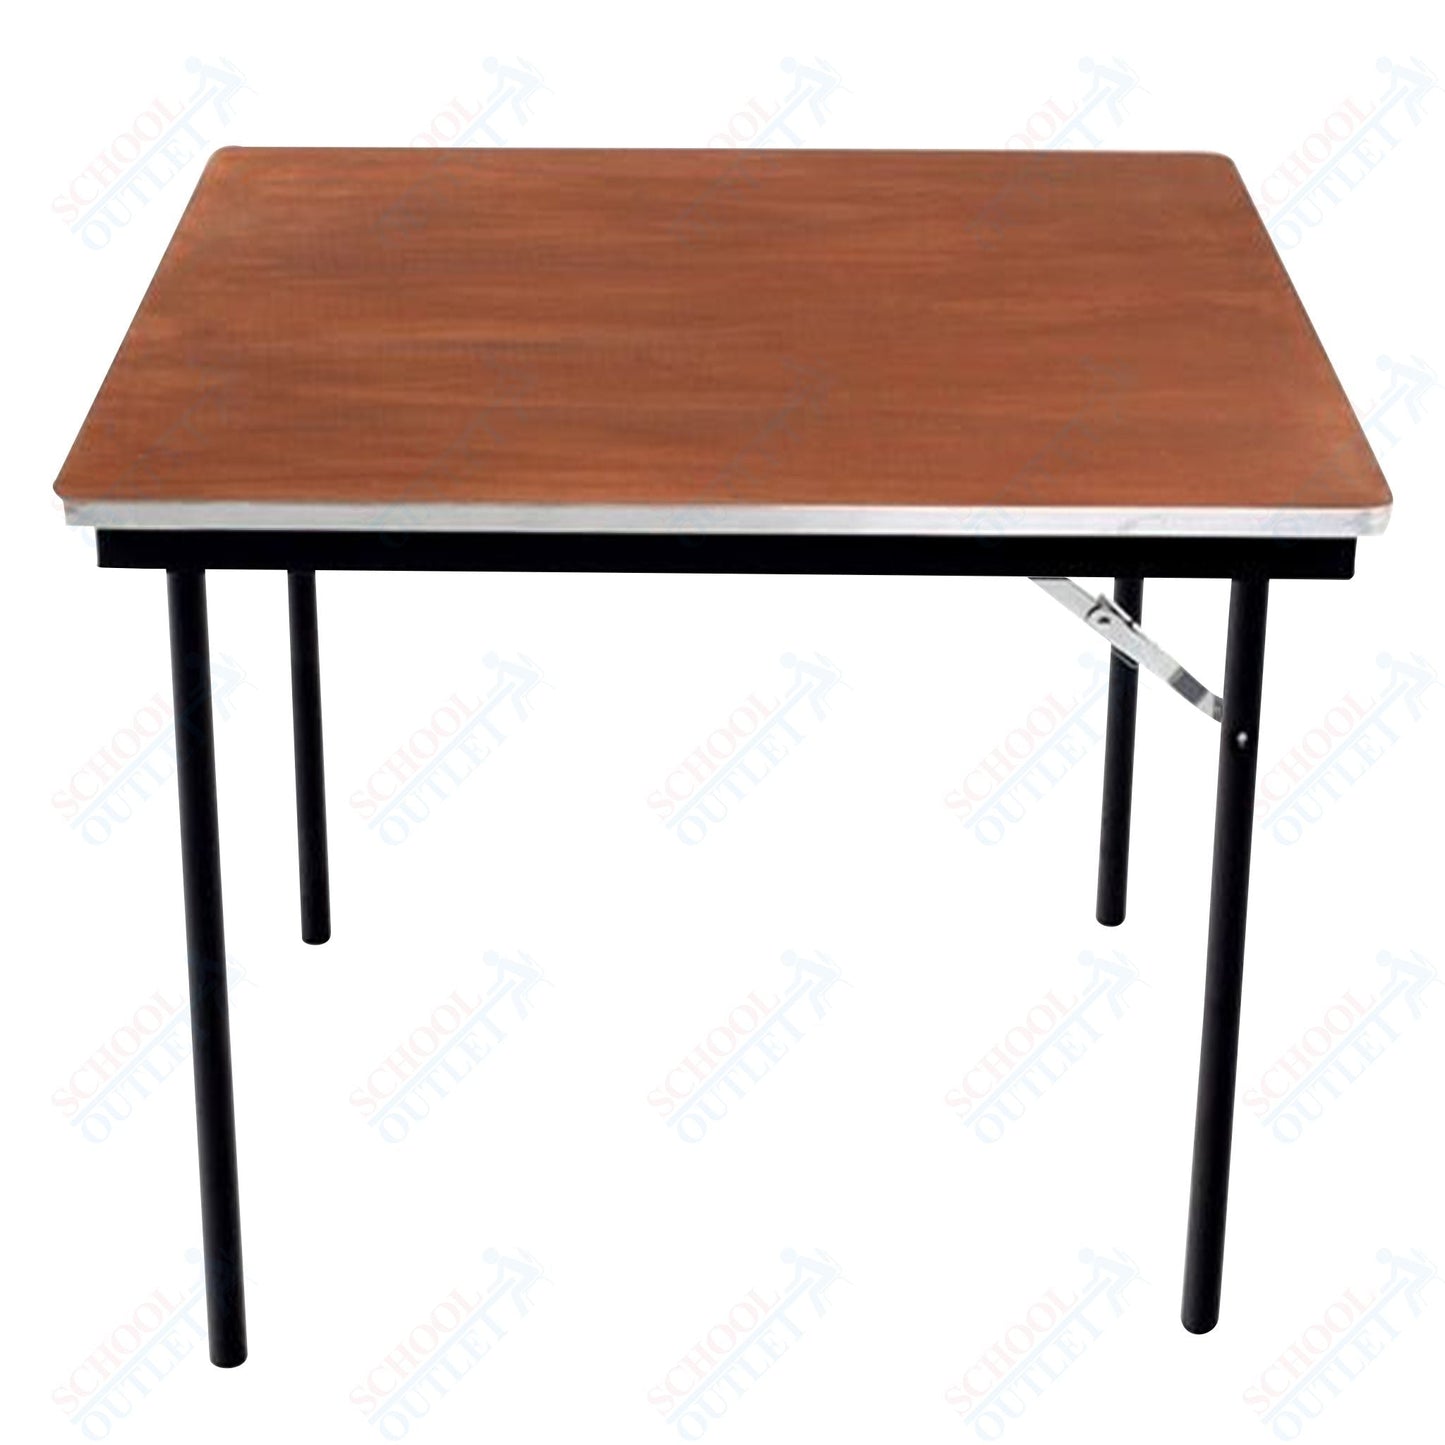 AmTab Folding Table - Plywood Stained and Sealed - Aluminum Edge - Square - 30"W x 30"L x 29"H (AmTab AMT - SQ30PA) - SchoolOutlet